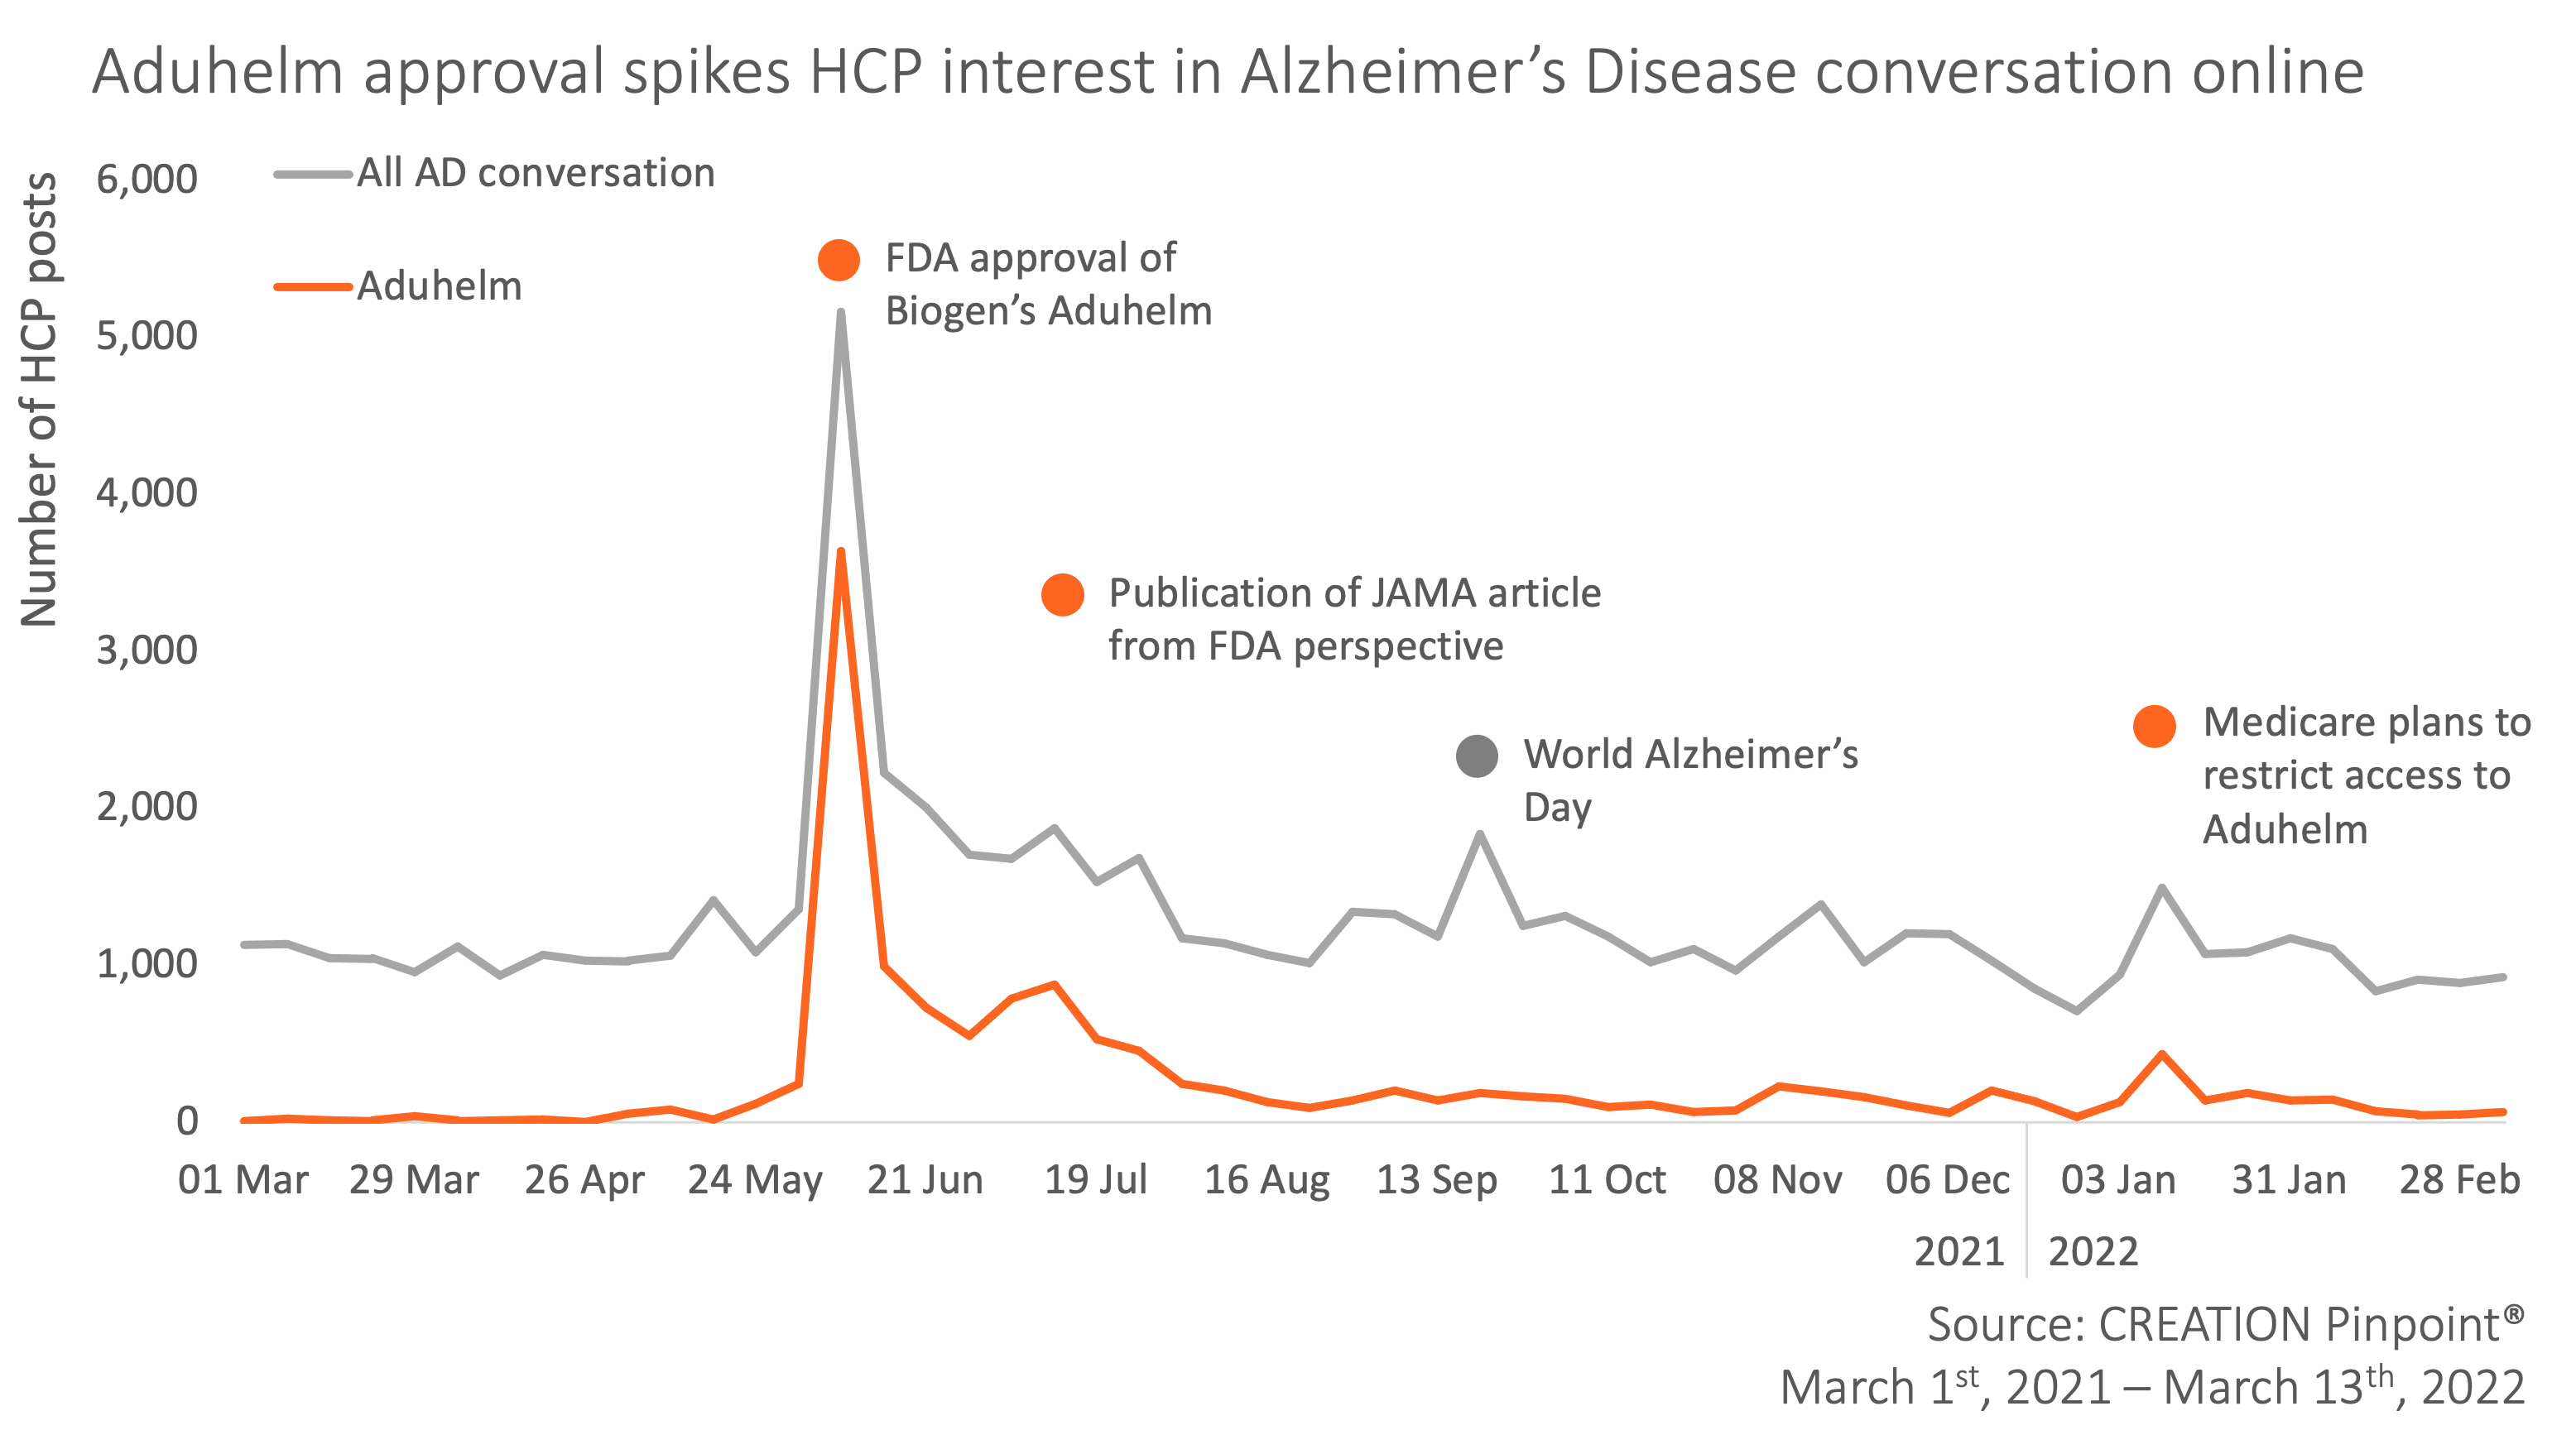 Graph showing aduhelm approval spikes HCP interest